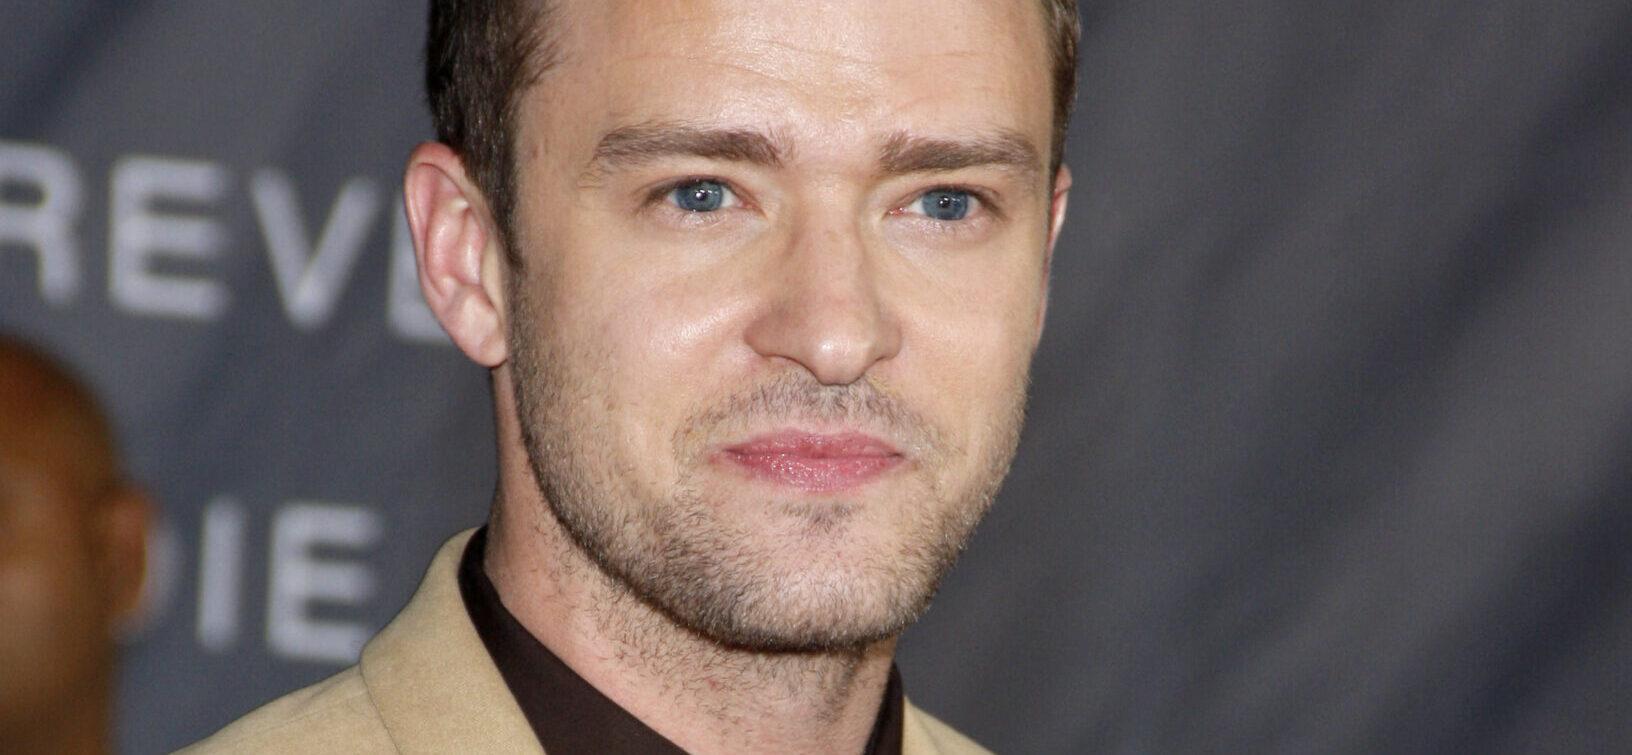 Justin Timberlake Is Focusing ‘On His Own Family’ Amid Britney Spears Memoir Reveals